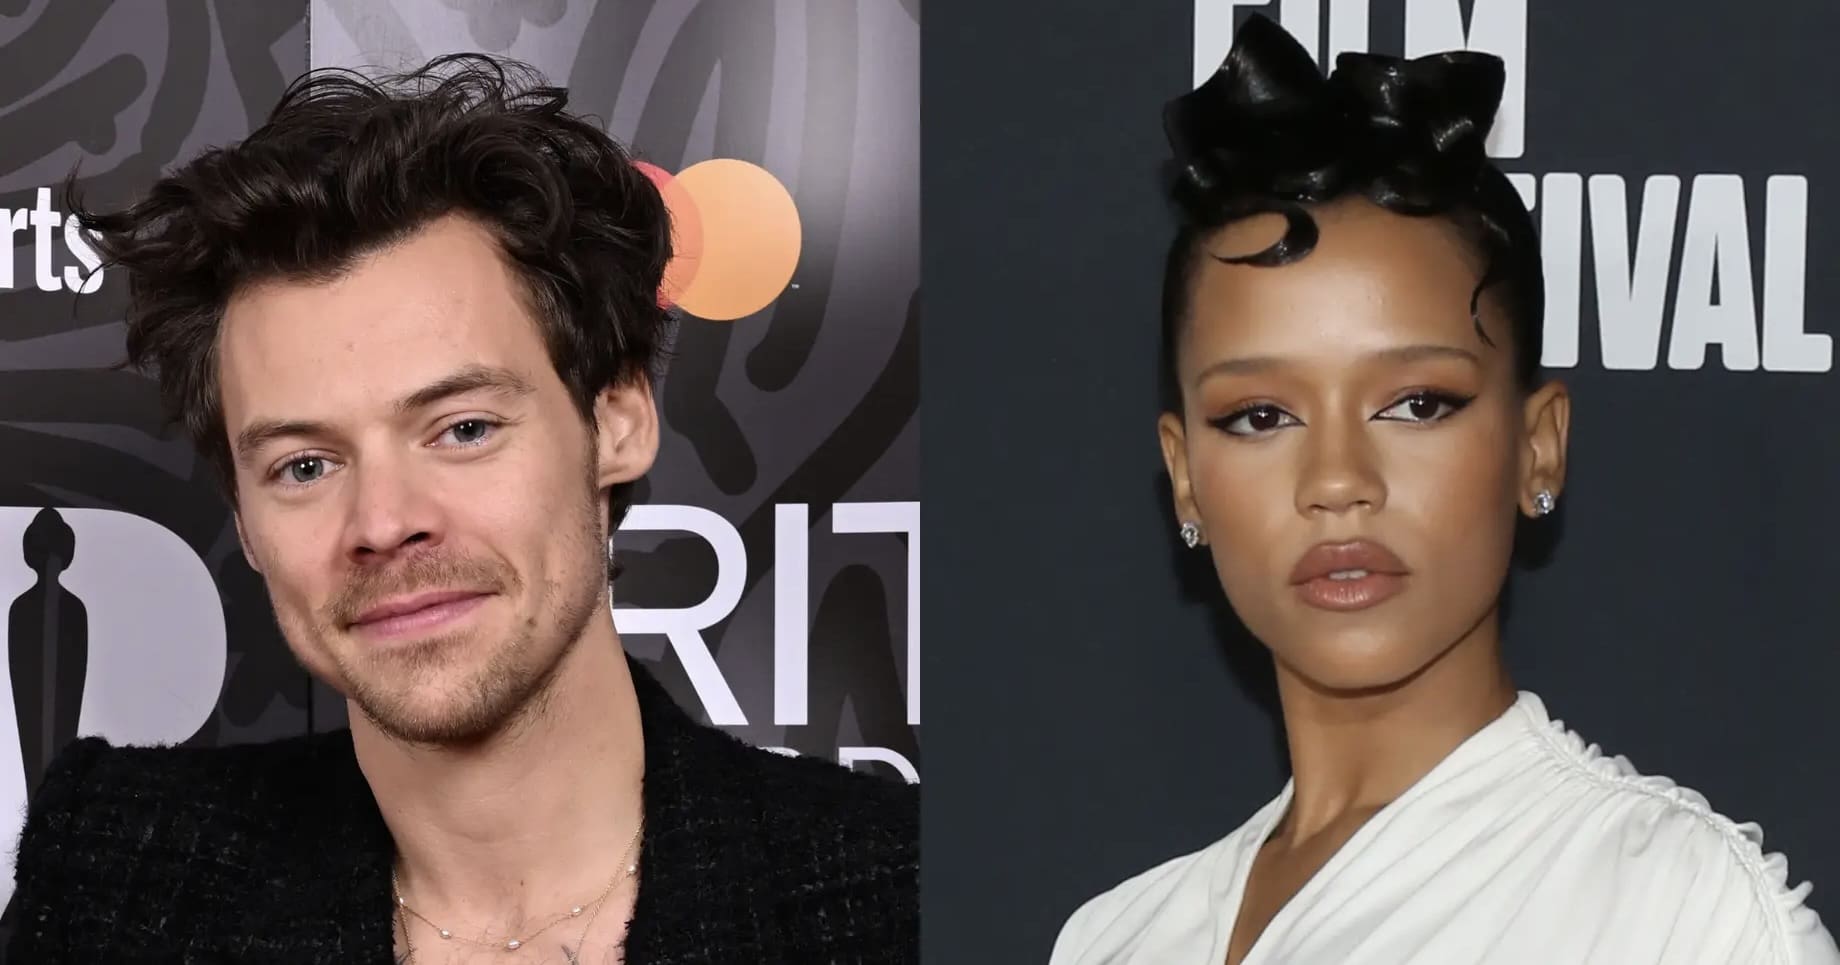 Taylor Russell Spotted at Harry Styles Concert Further Fueling Relationship Rumors [Video]